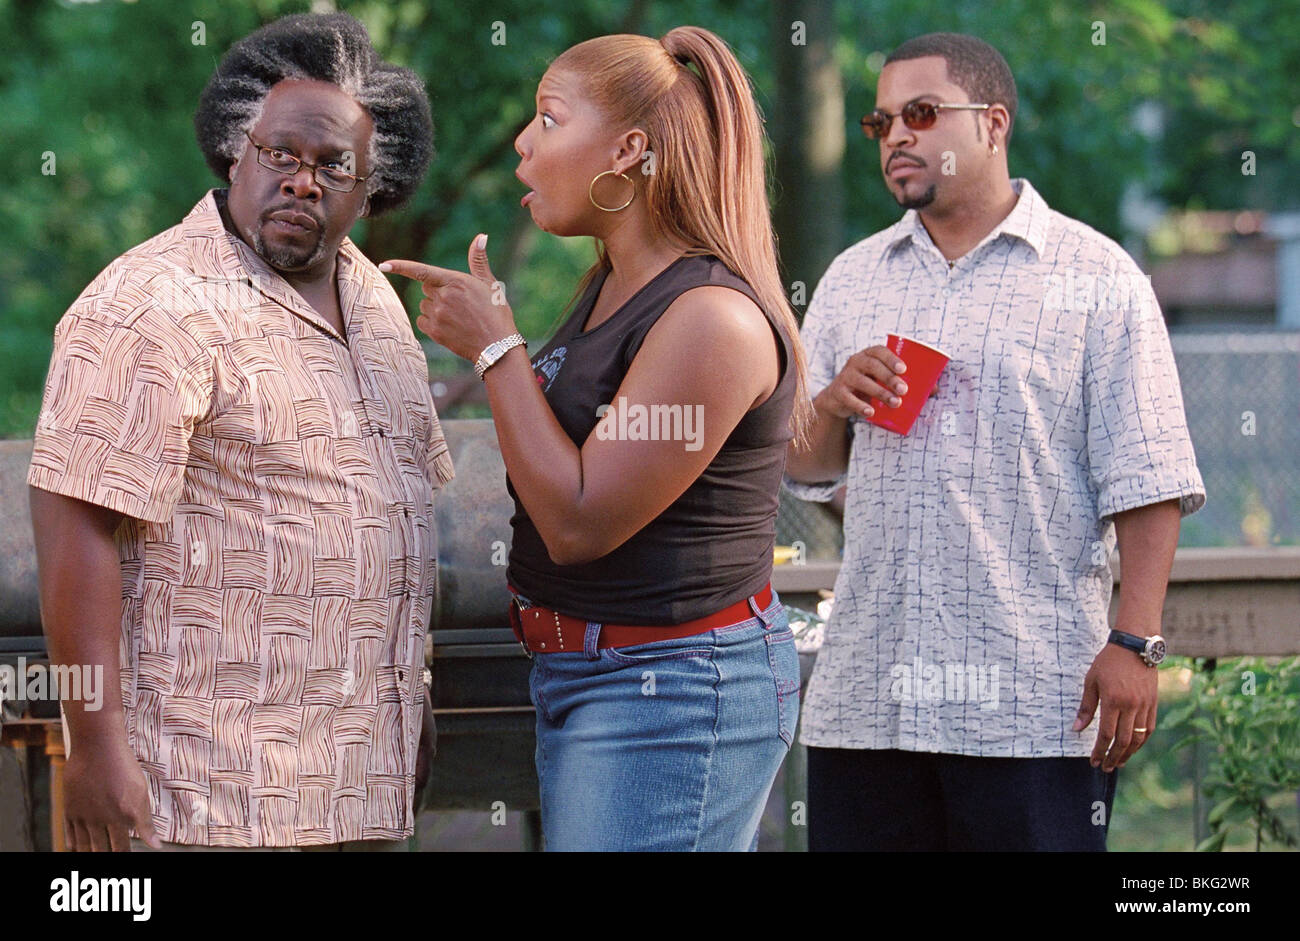 BARBERSHOP 2 : BACK IN BUSINESS (2004) Cedric the Entertainer, Queen  Latifah, ICE CUBE BBS2 001-21 Photo Stock - Alamy